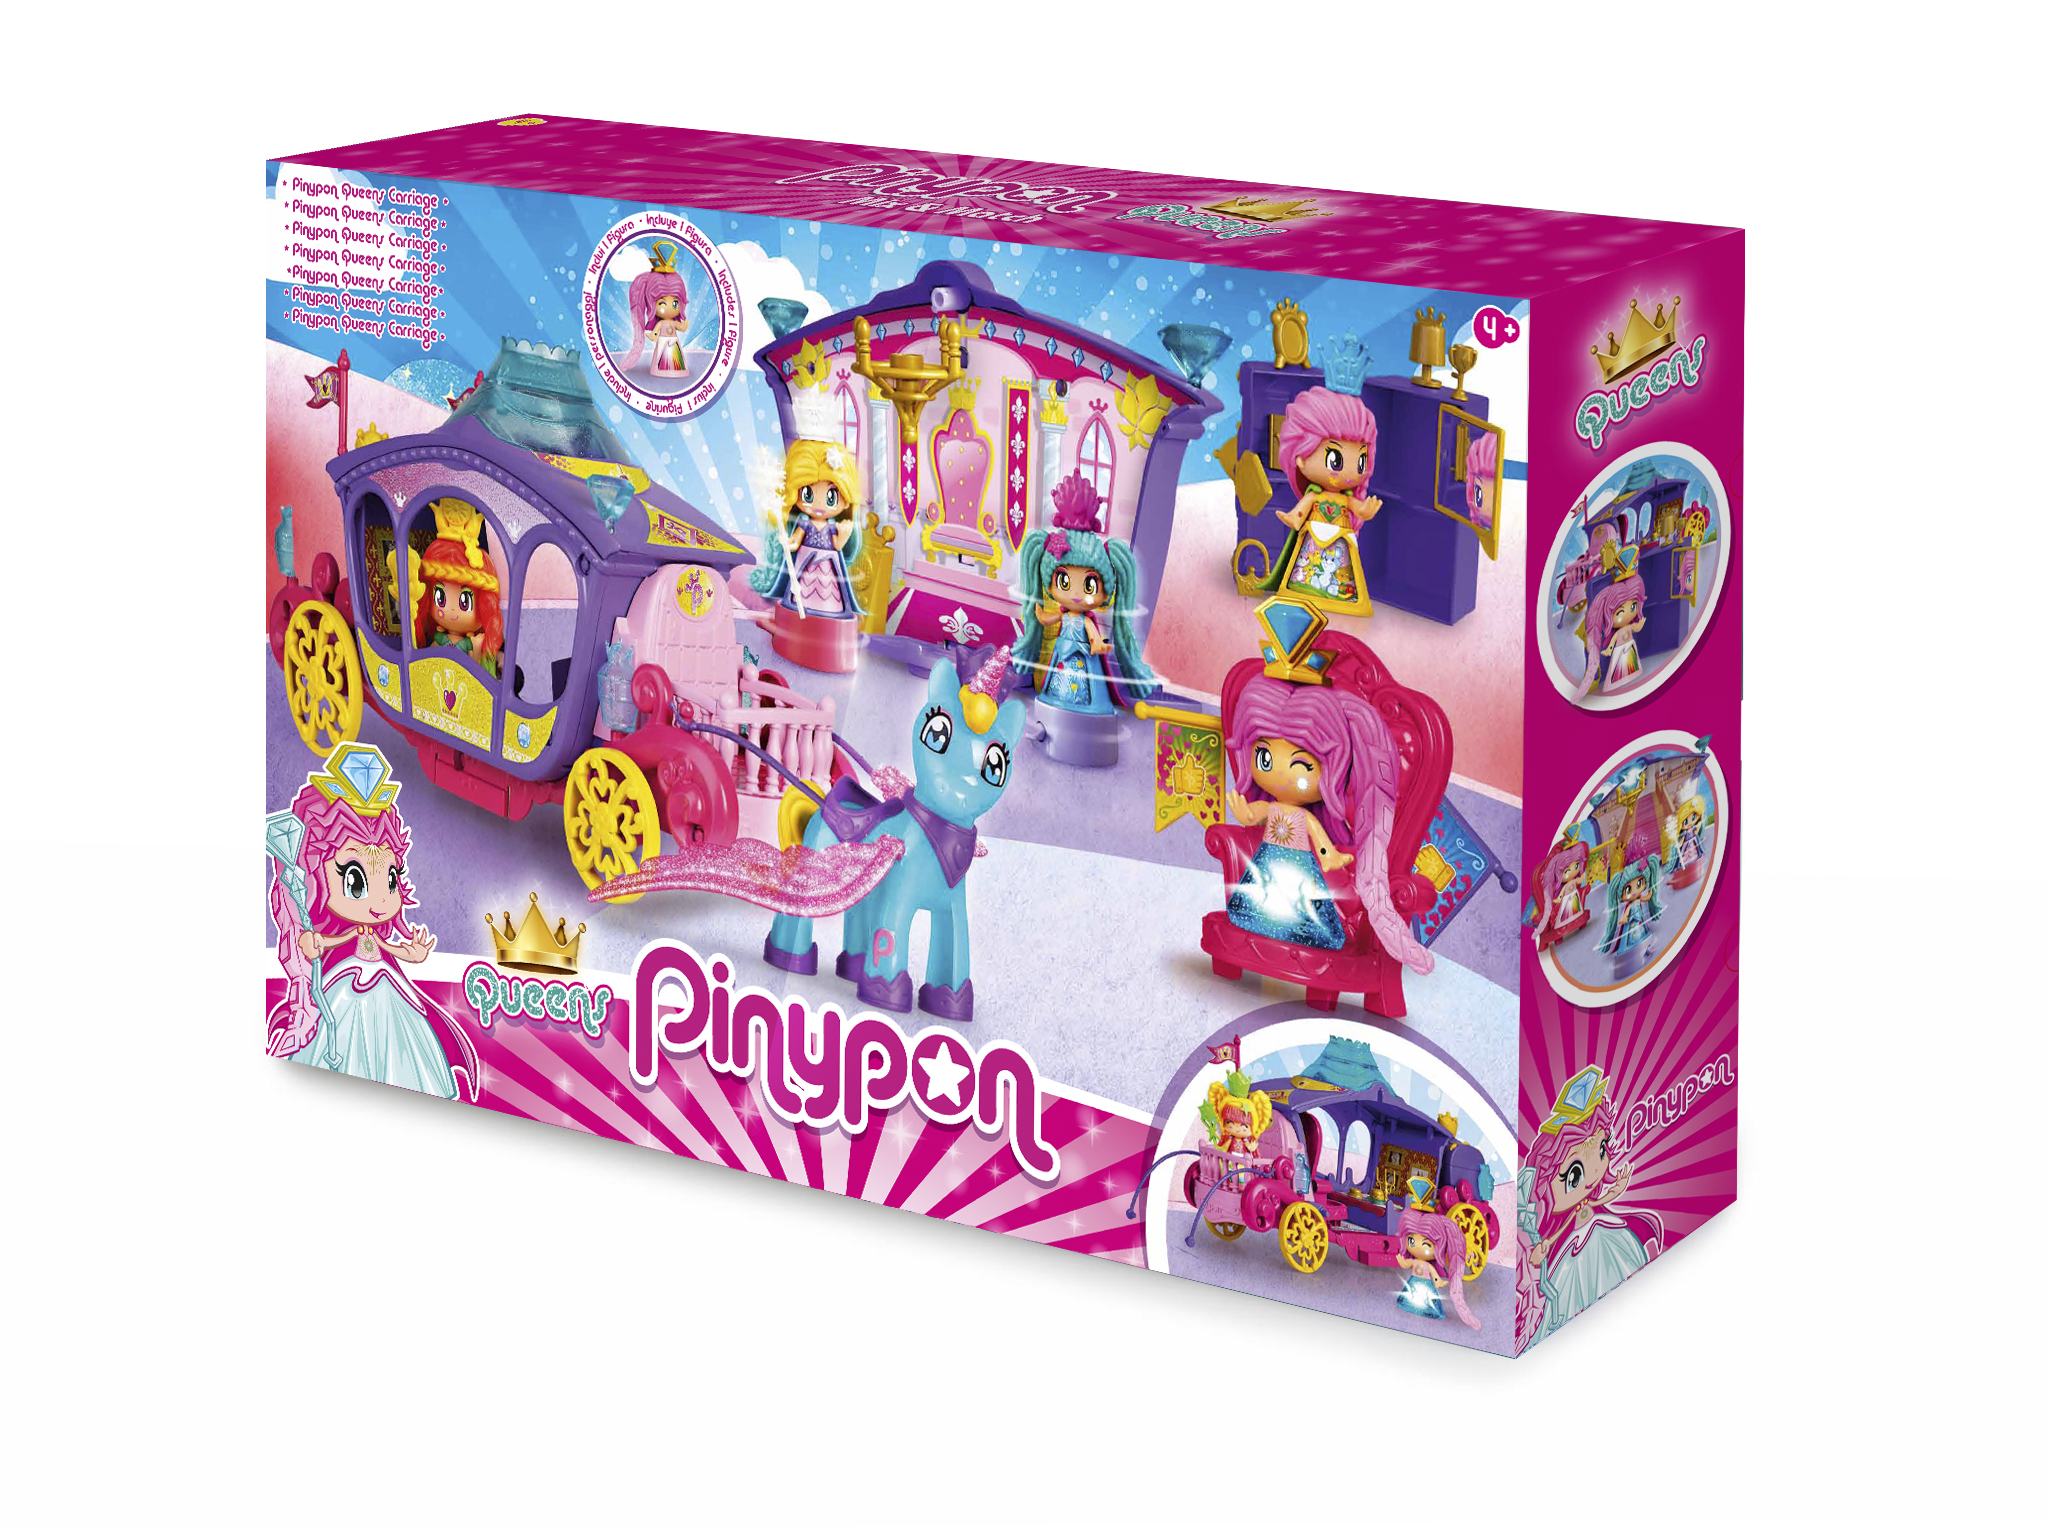 PINYPON QUEENS CARRIAGE 15805 - N38620